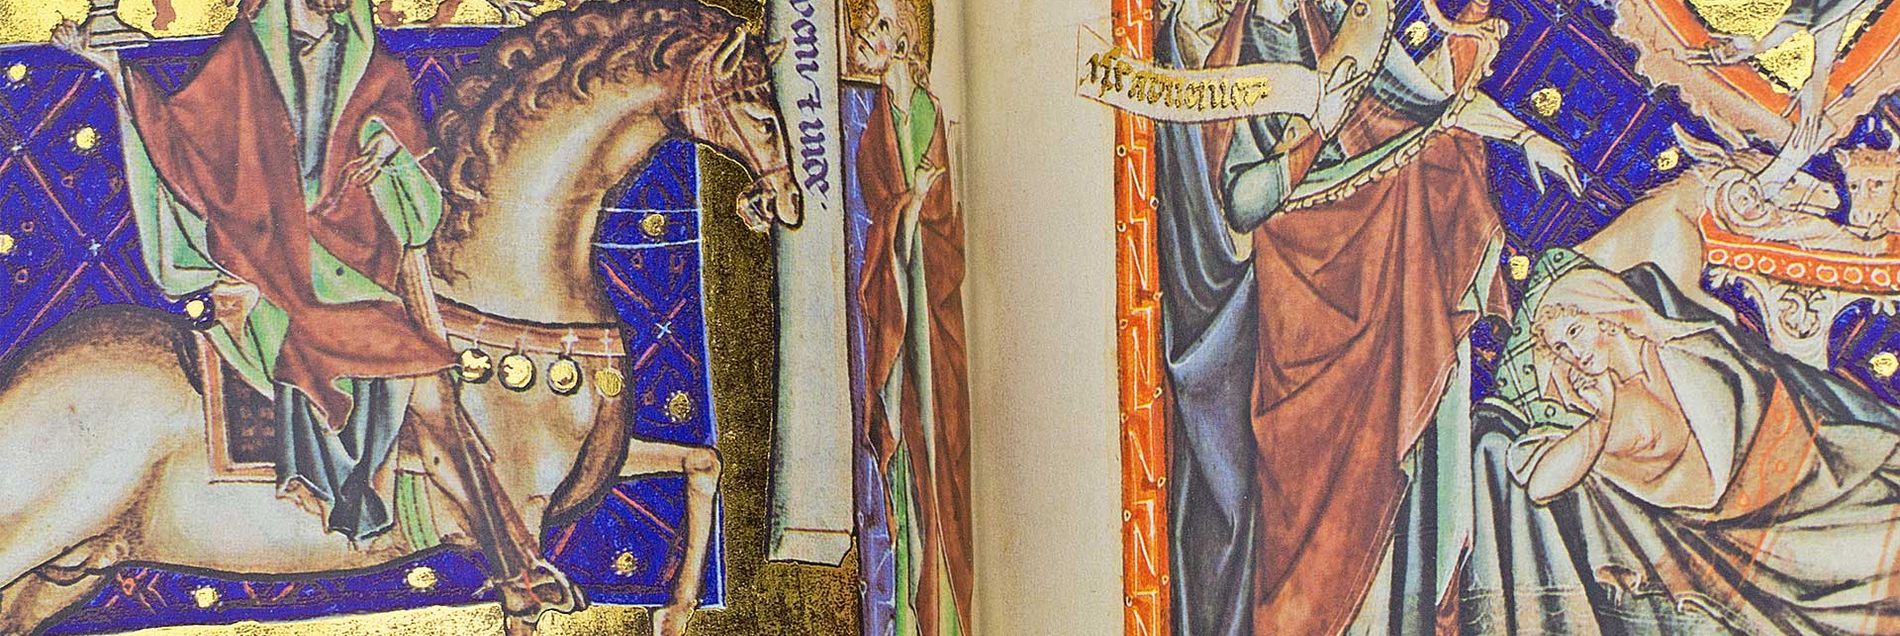 <i>“One of the most beautiful English Apocalypse manuscripts of the early Gothic period”</i>